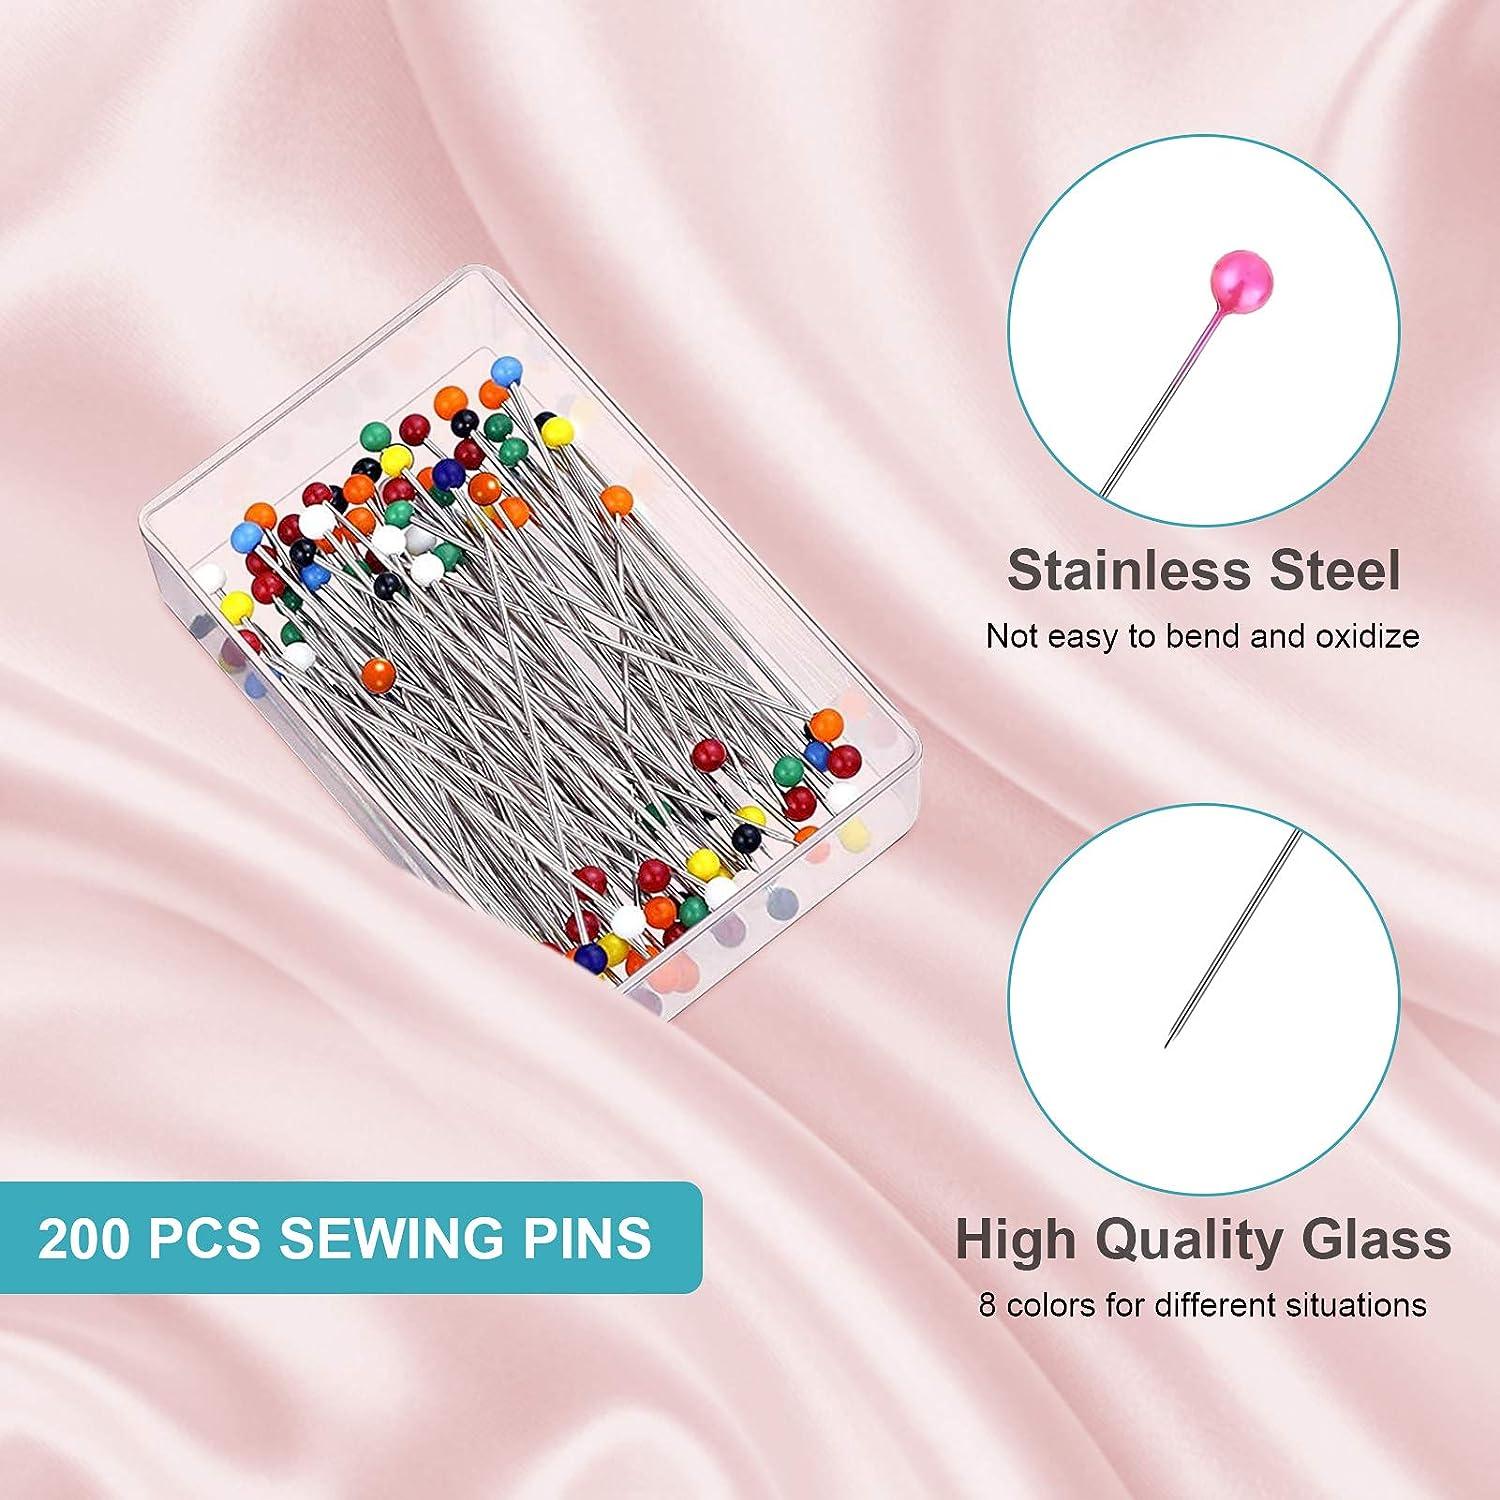 Sewing Pins & Sewing Clips